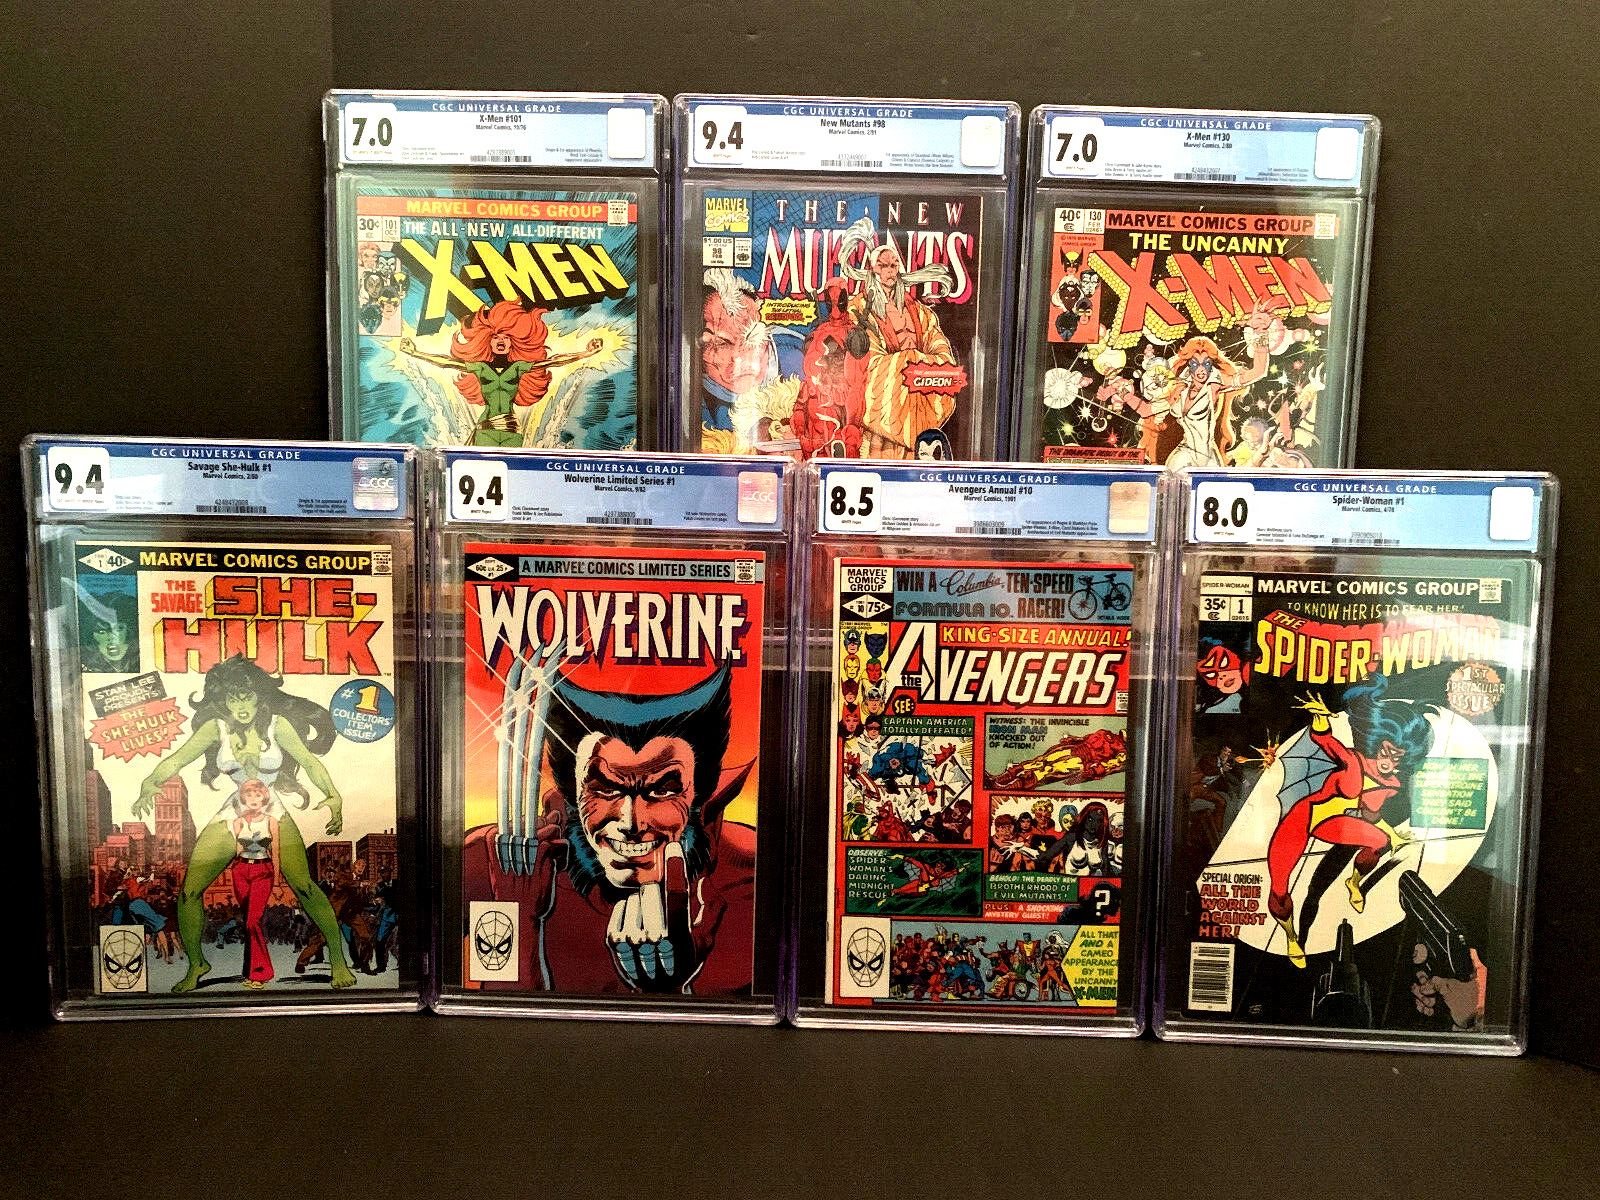 Comic Book Lot - Guaranteed CGC Graded Slab in each lot (Marvel Only)